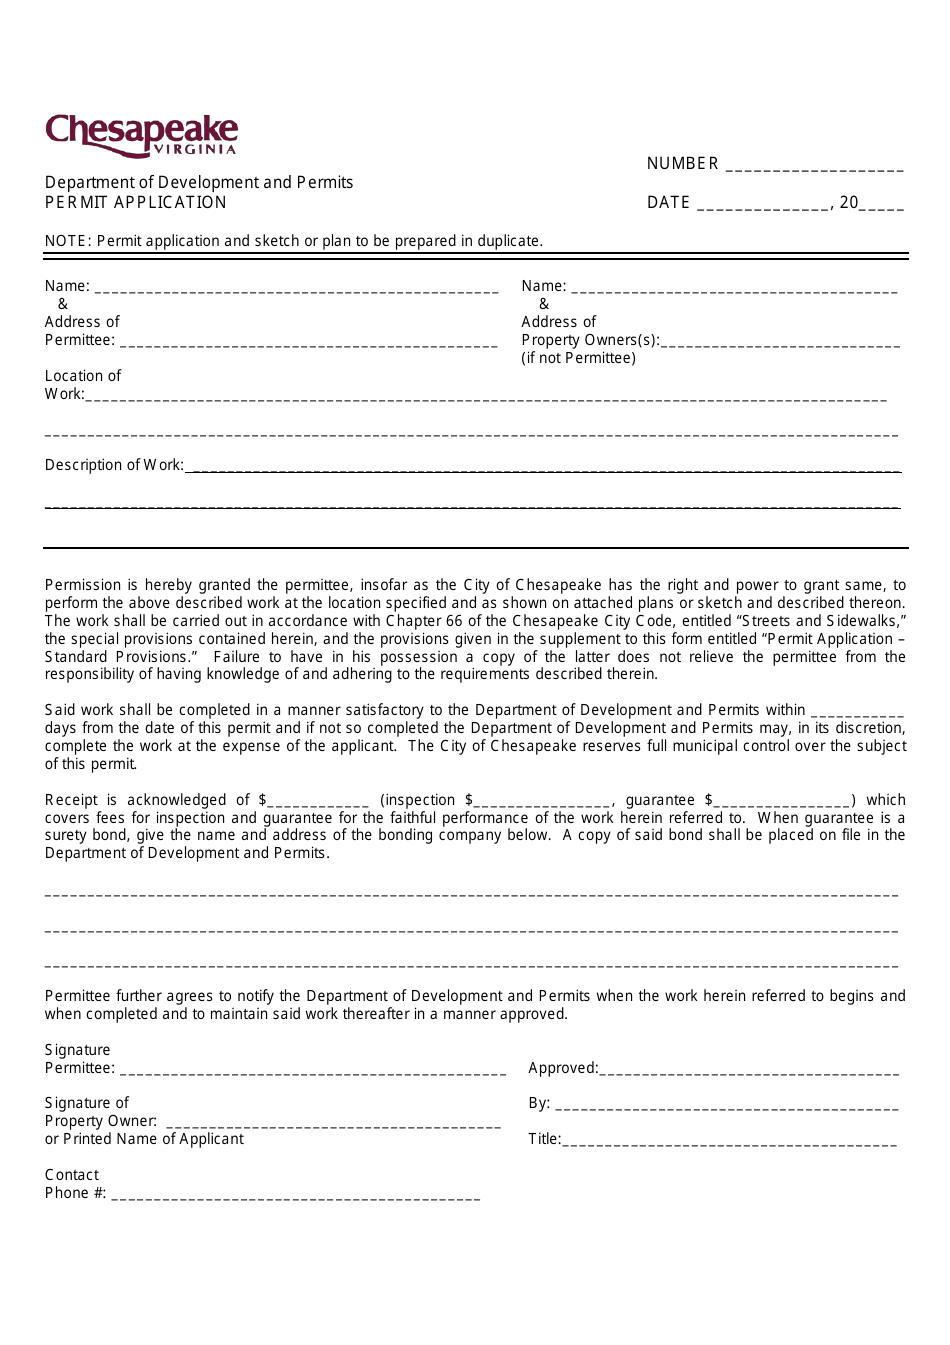 Permit Application Form - City of Chesapeake, Virginia, Page 1